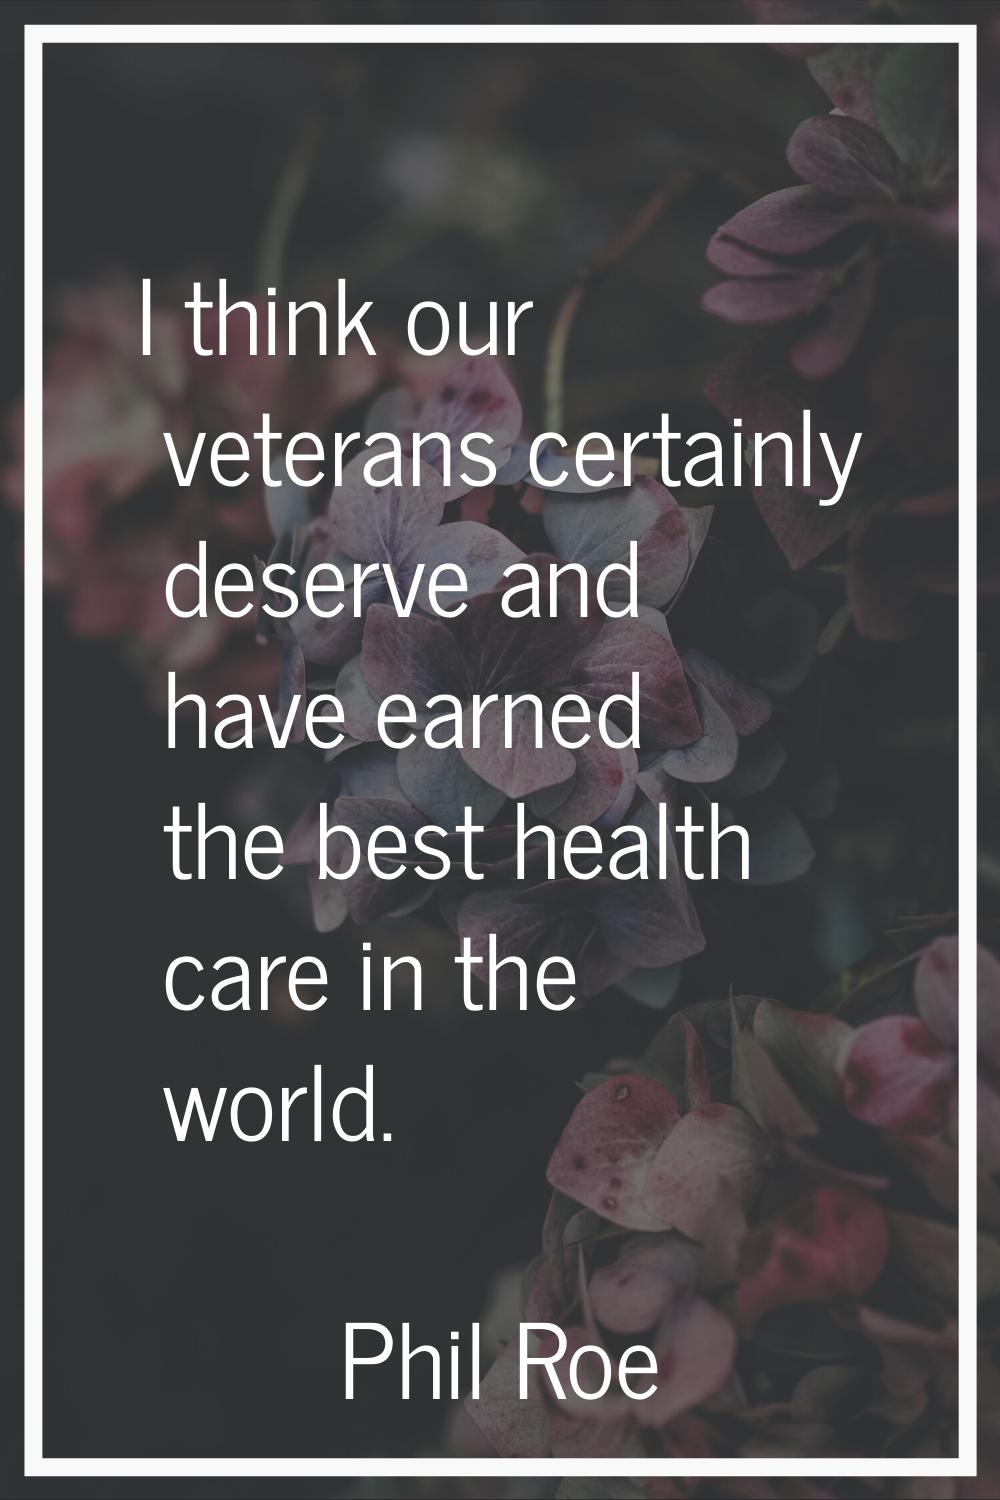 I think our veterans certainly deserve and have earned the best health care in the world.